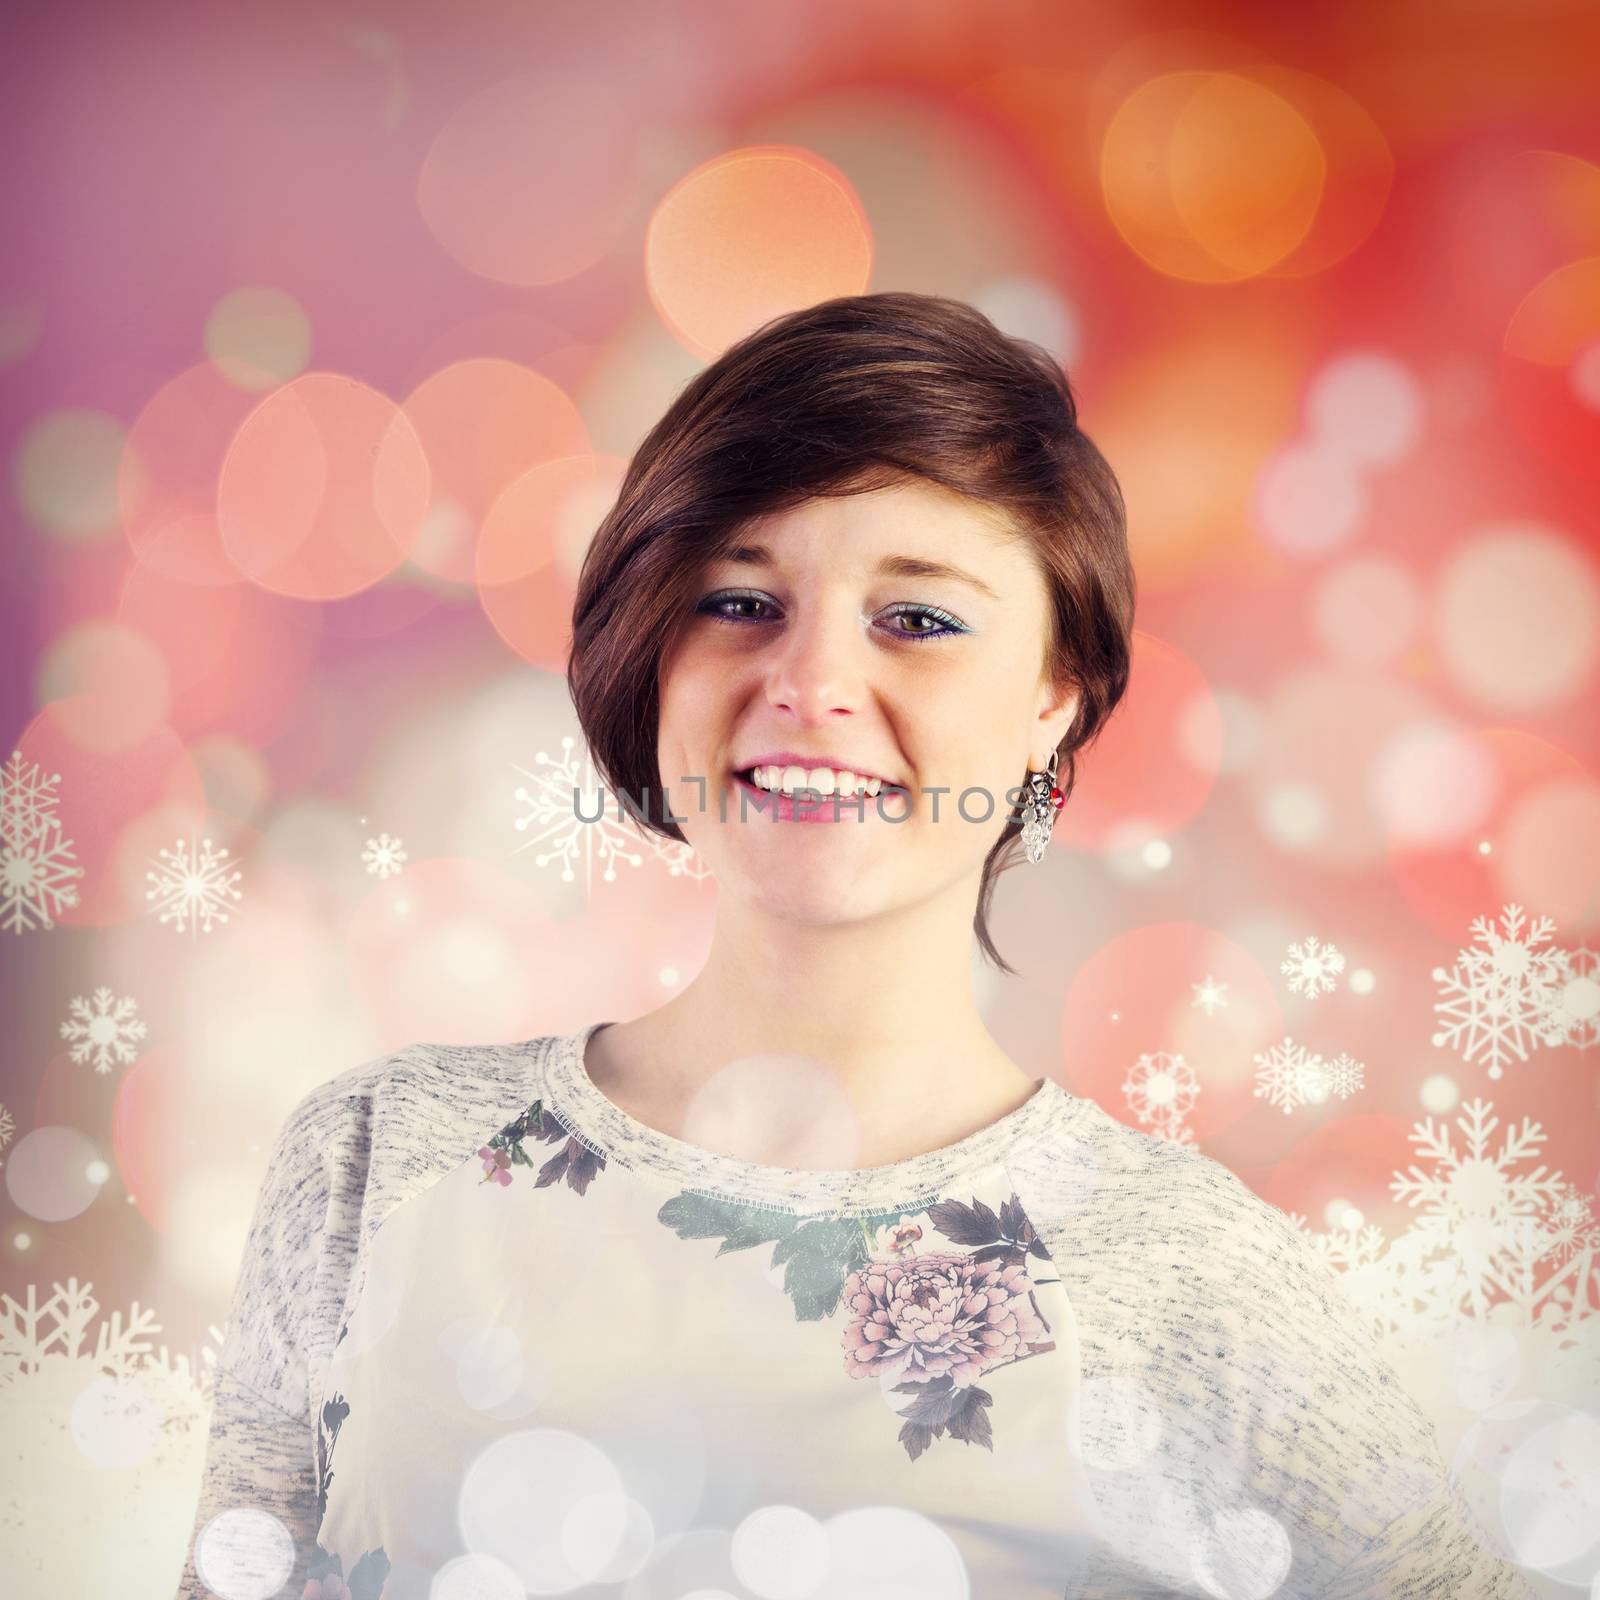 Pretty brunette smiling at camera against snowflake pattern